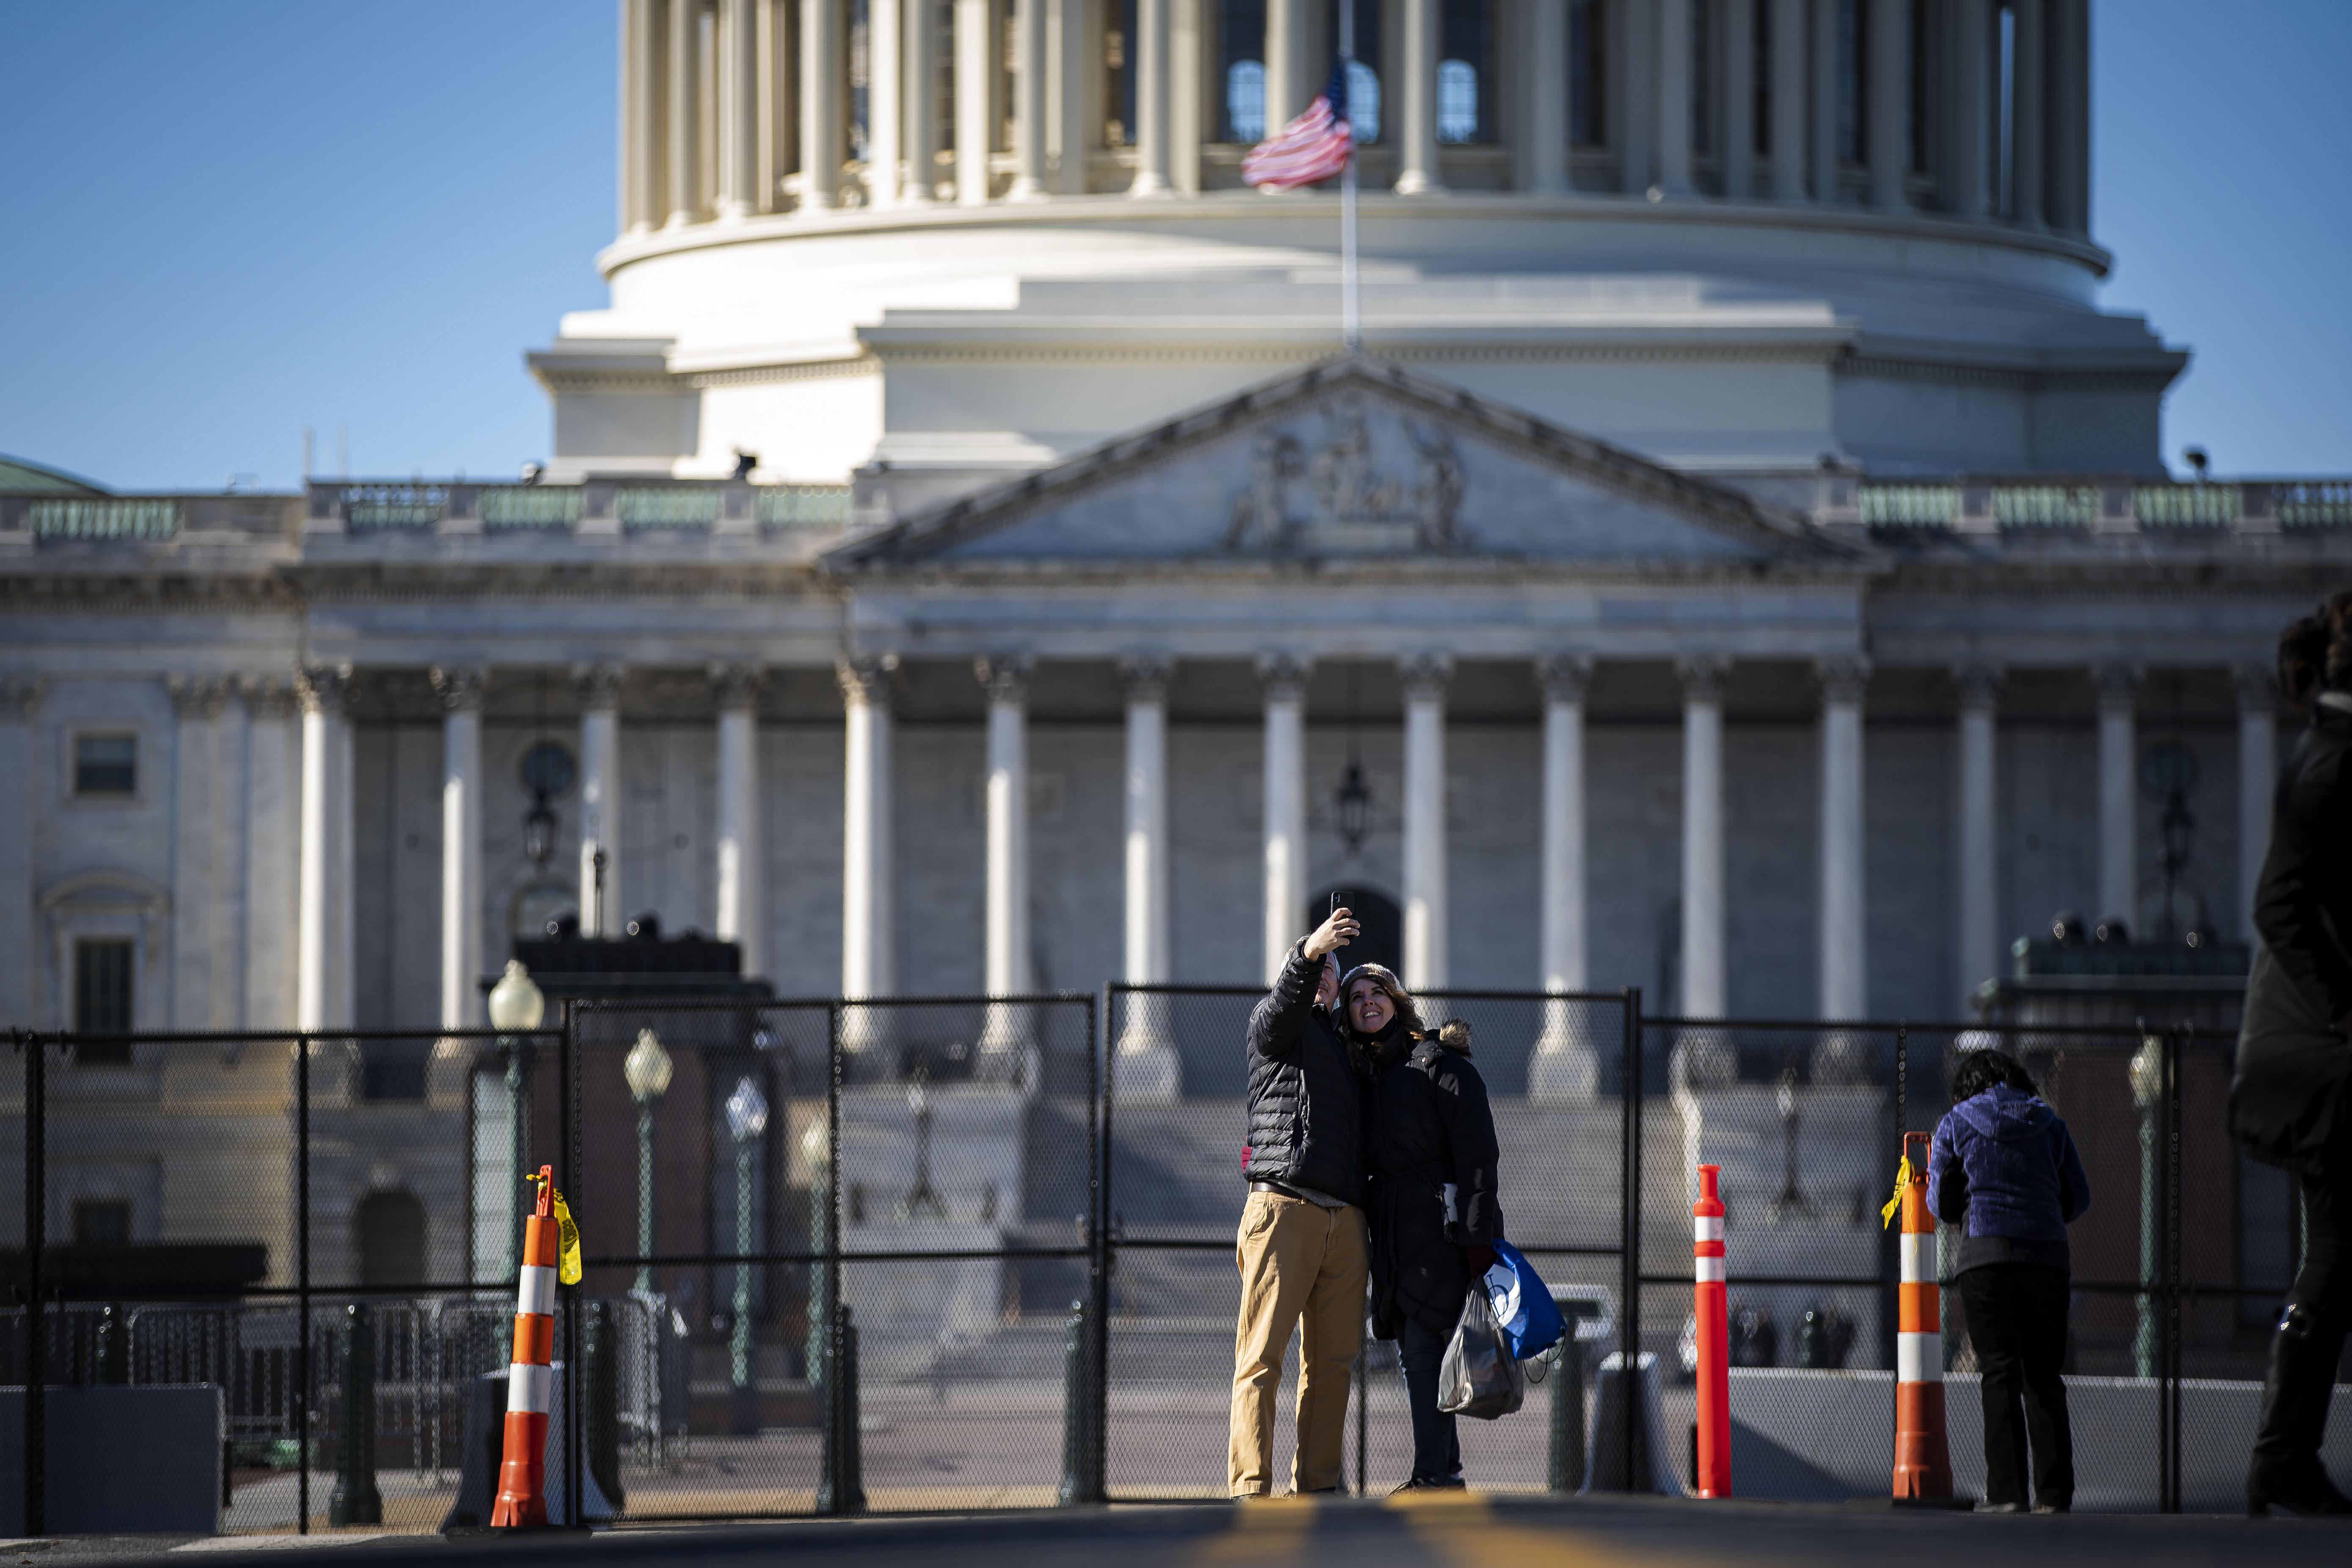 A smiling couple takes a selfie in front of the new security fence outside the Capitol dome